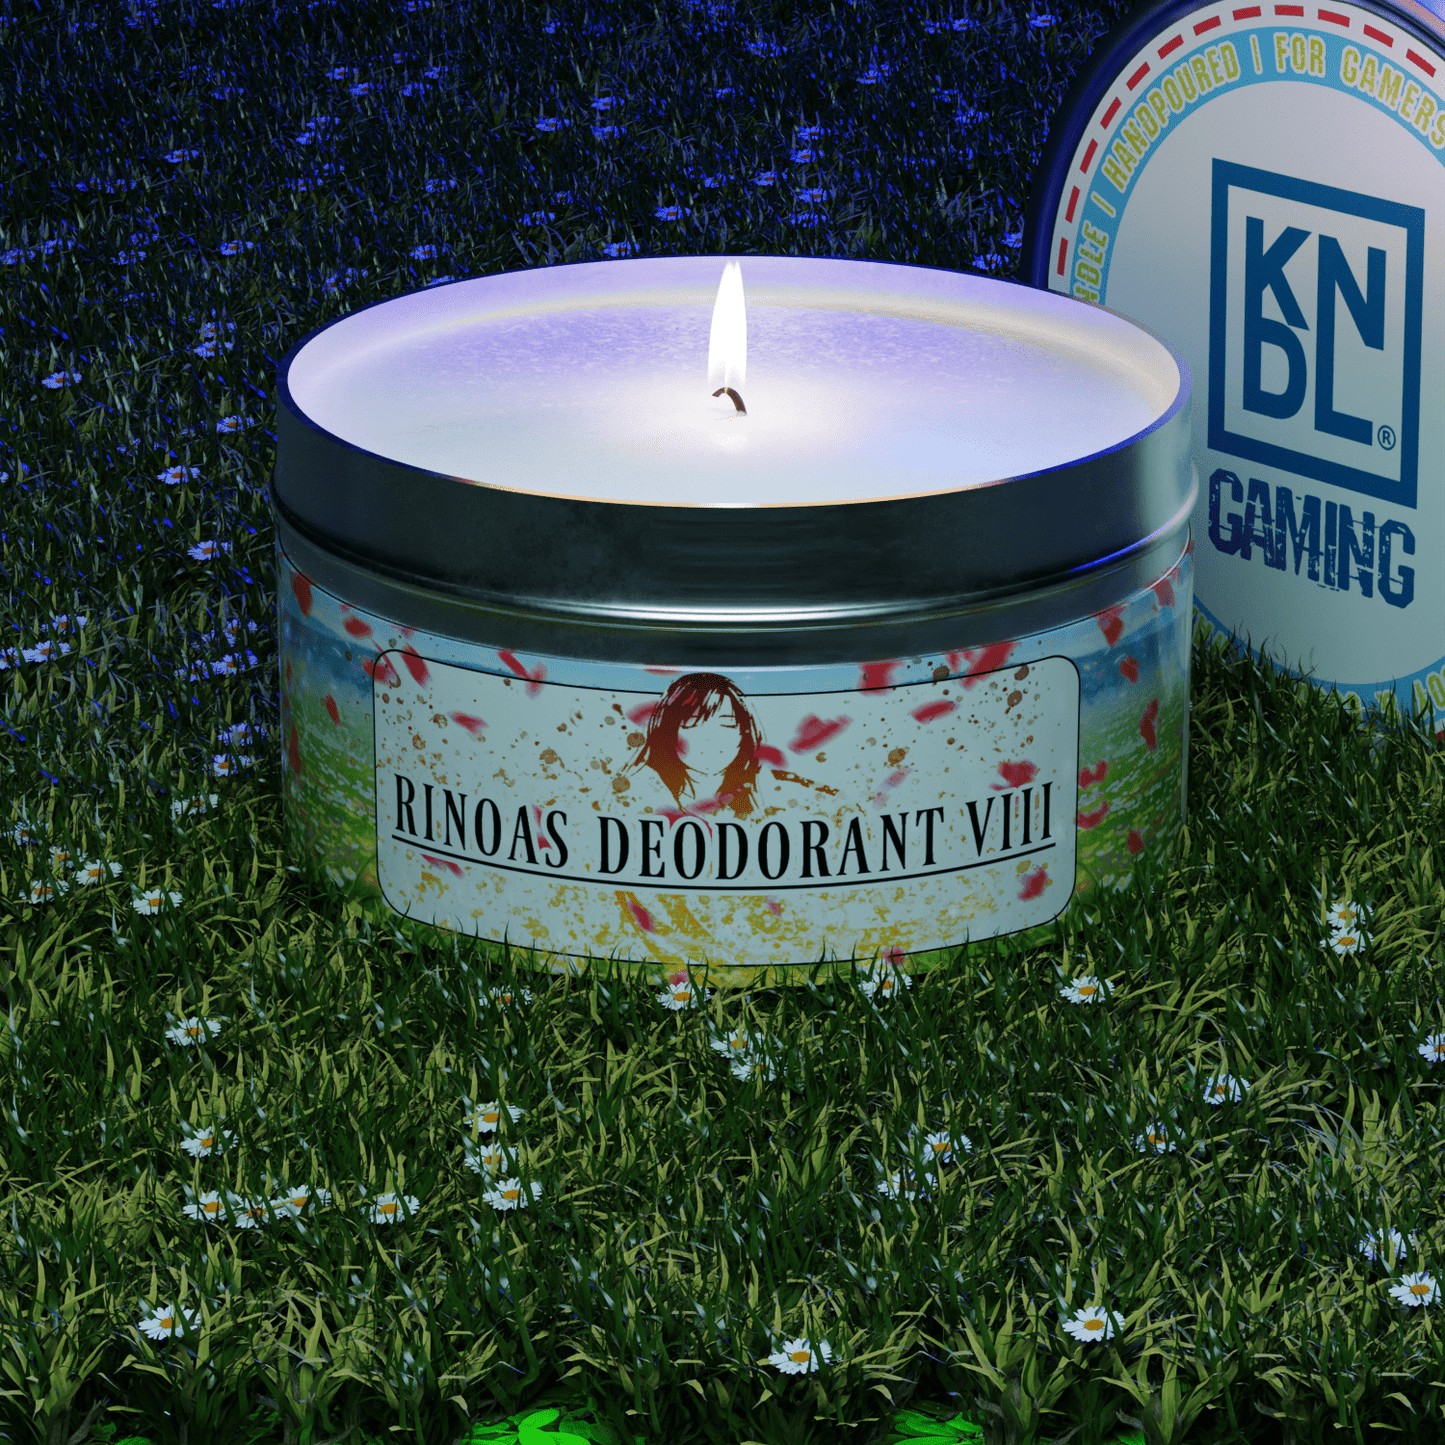 TIN NR 18 | RINOA'S DEODORANT | FINAL FANTASY INSPIRED SCENTED CANDLE